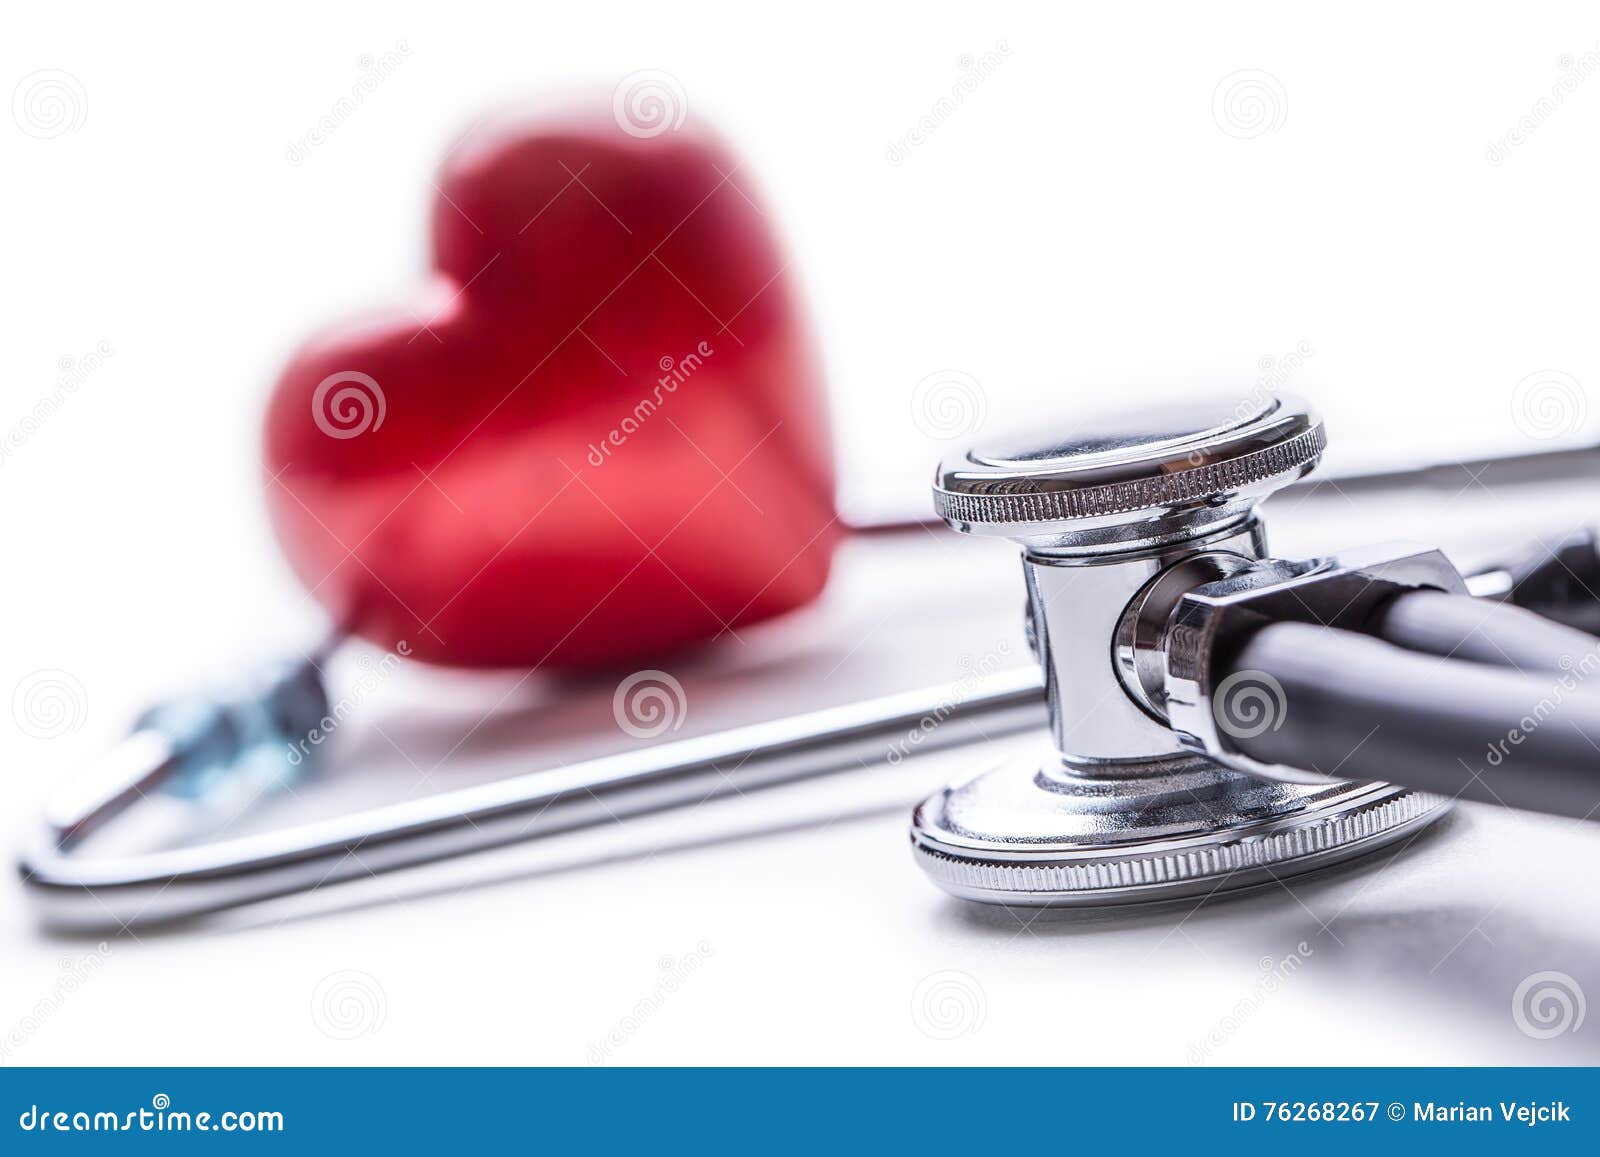 stethoscope. medical tool stethoscop with pills and red heart